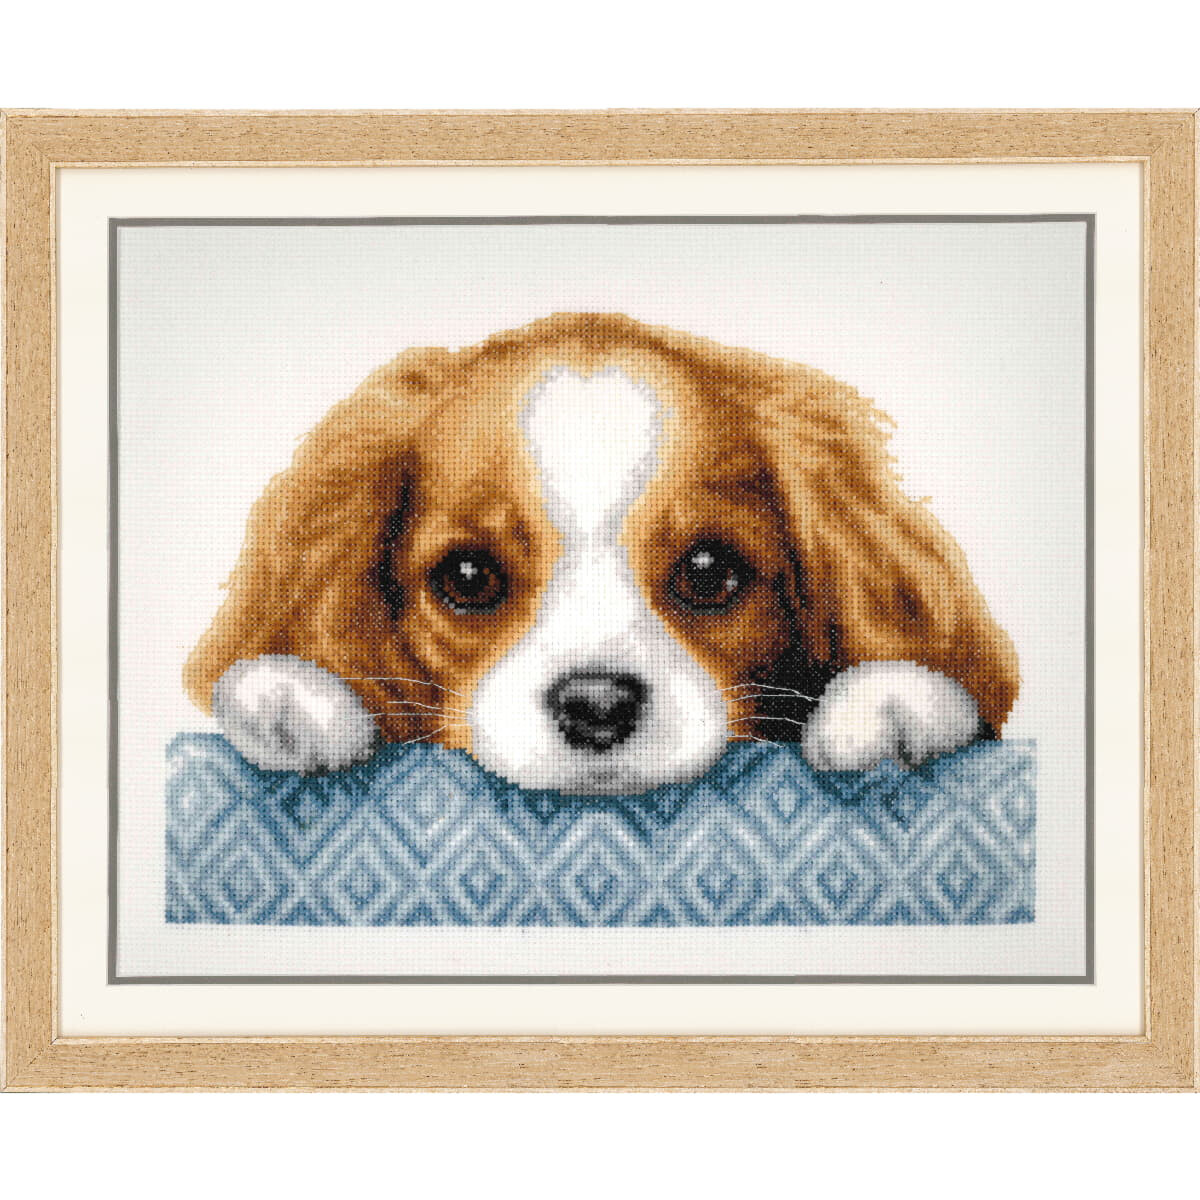 Vervaco counted cross stitch kit "Puppy",...